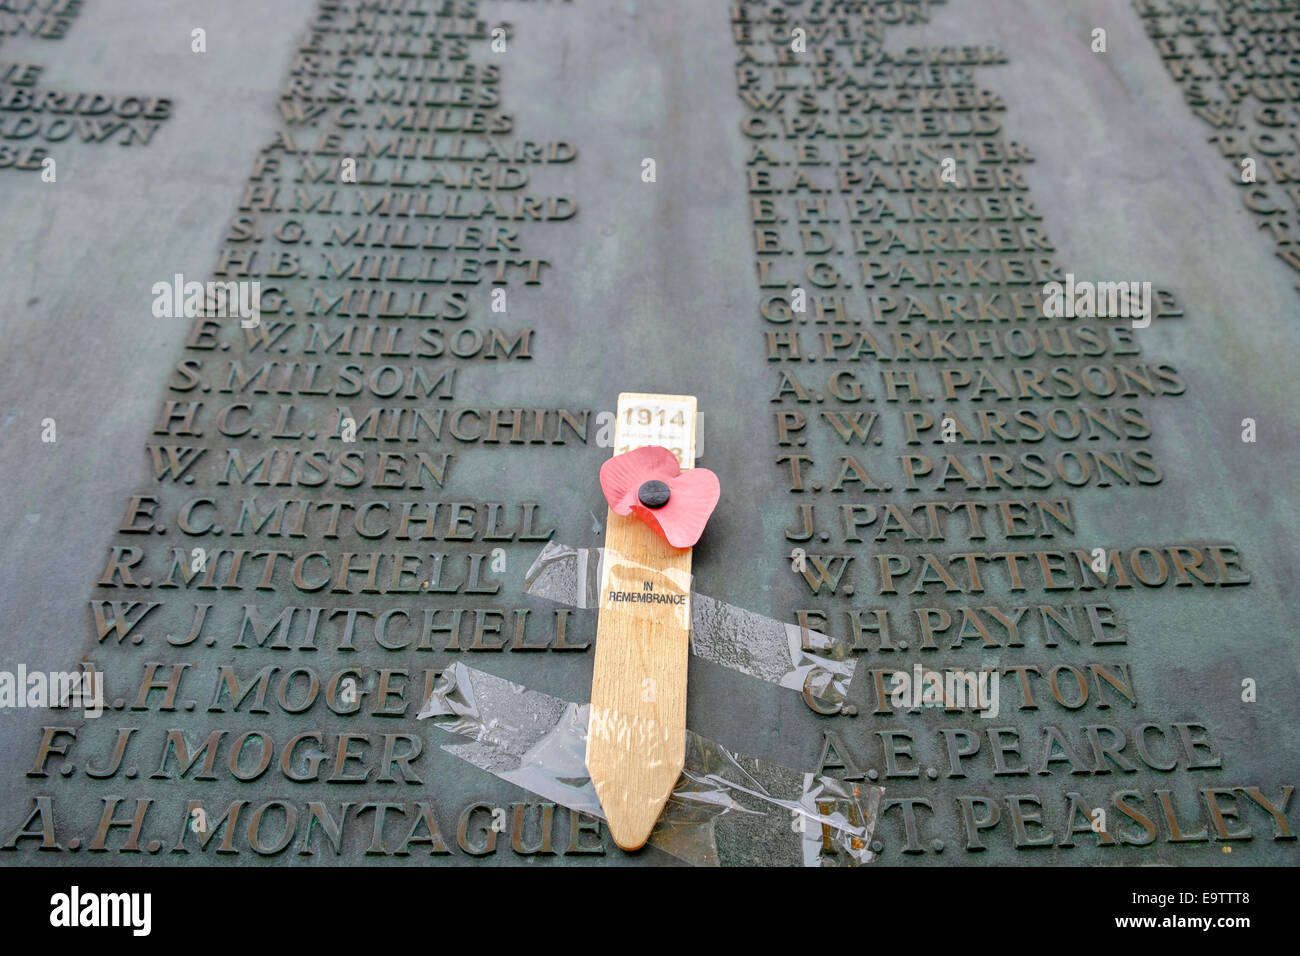 Remembrance poppy placed next to the list of fallen service personnel on the war memorial in Bath,Somerset,England,UK Stock Photo